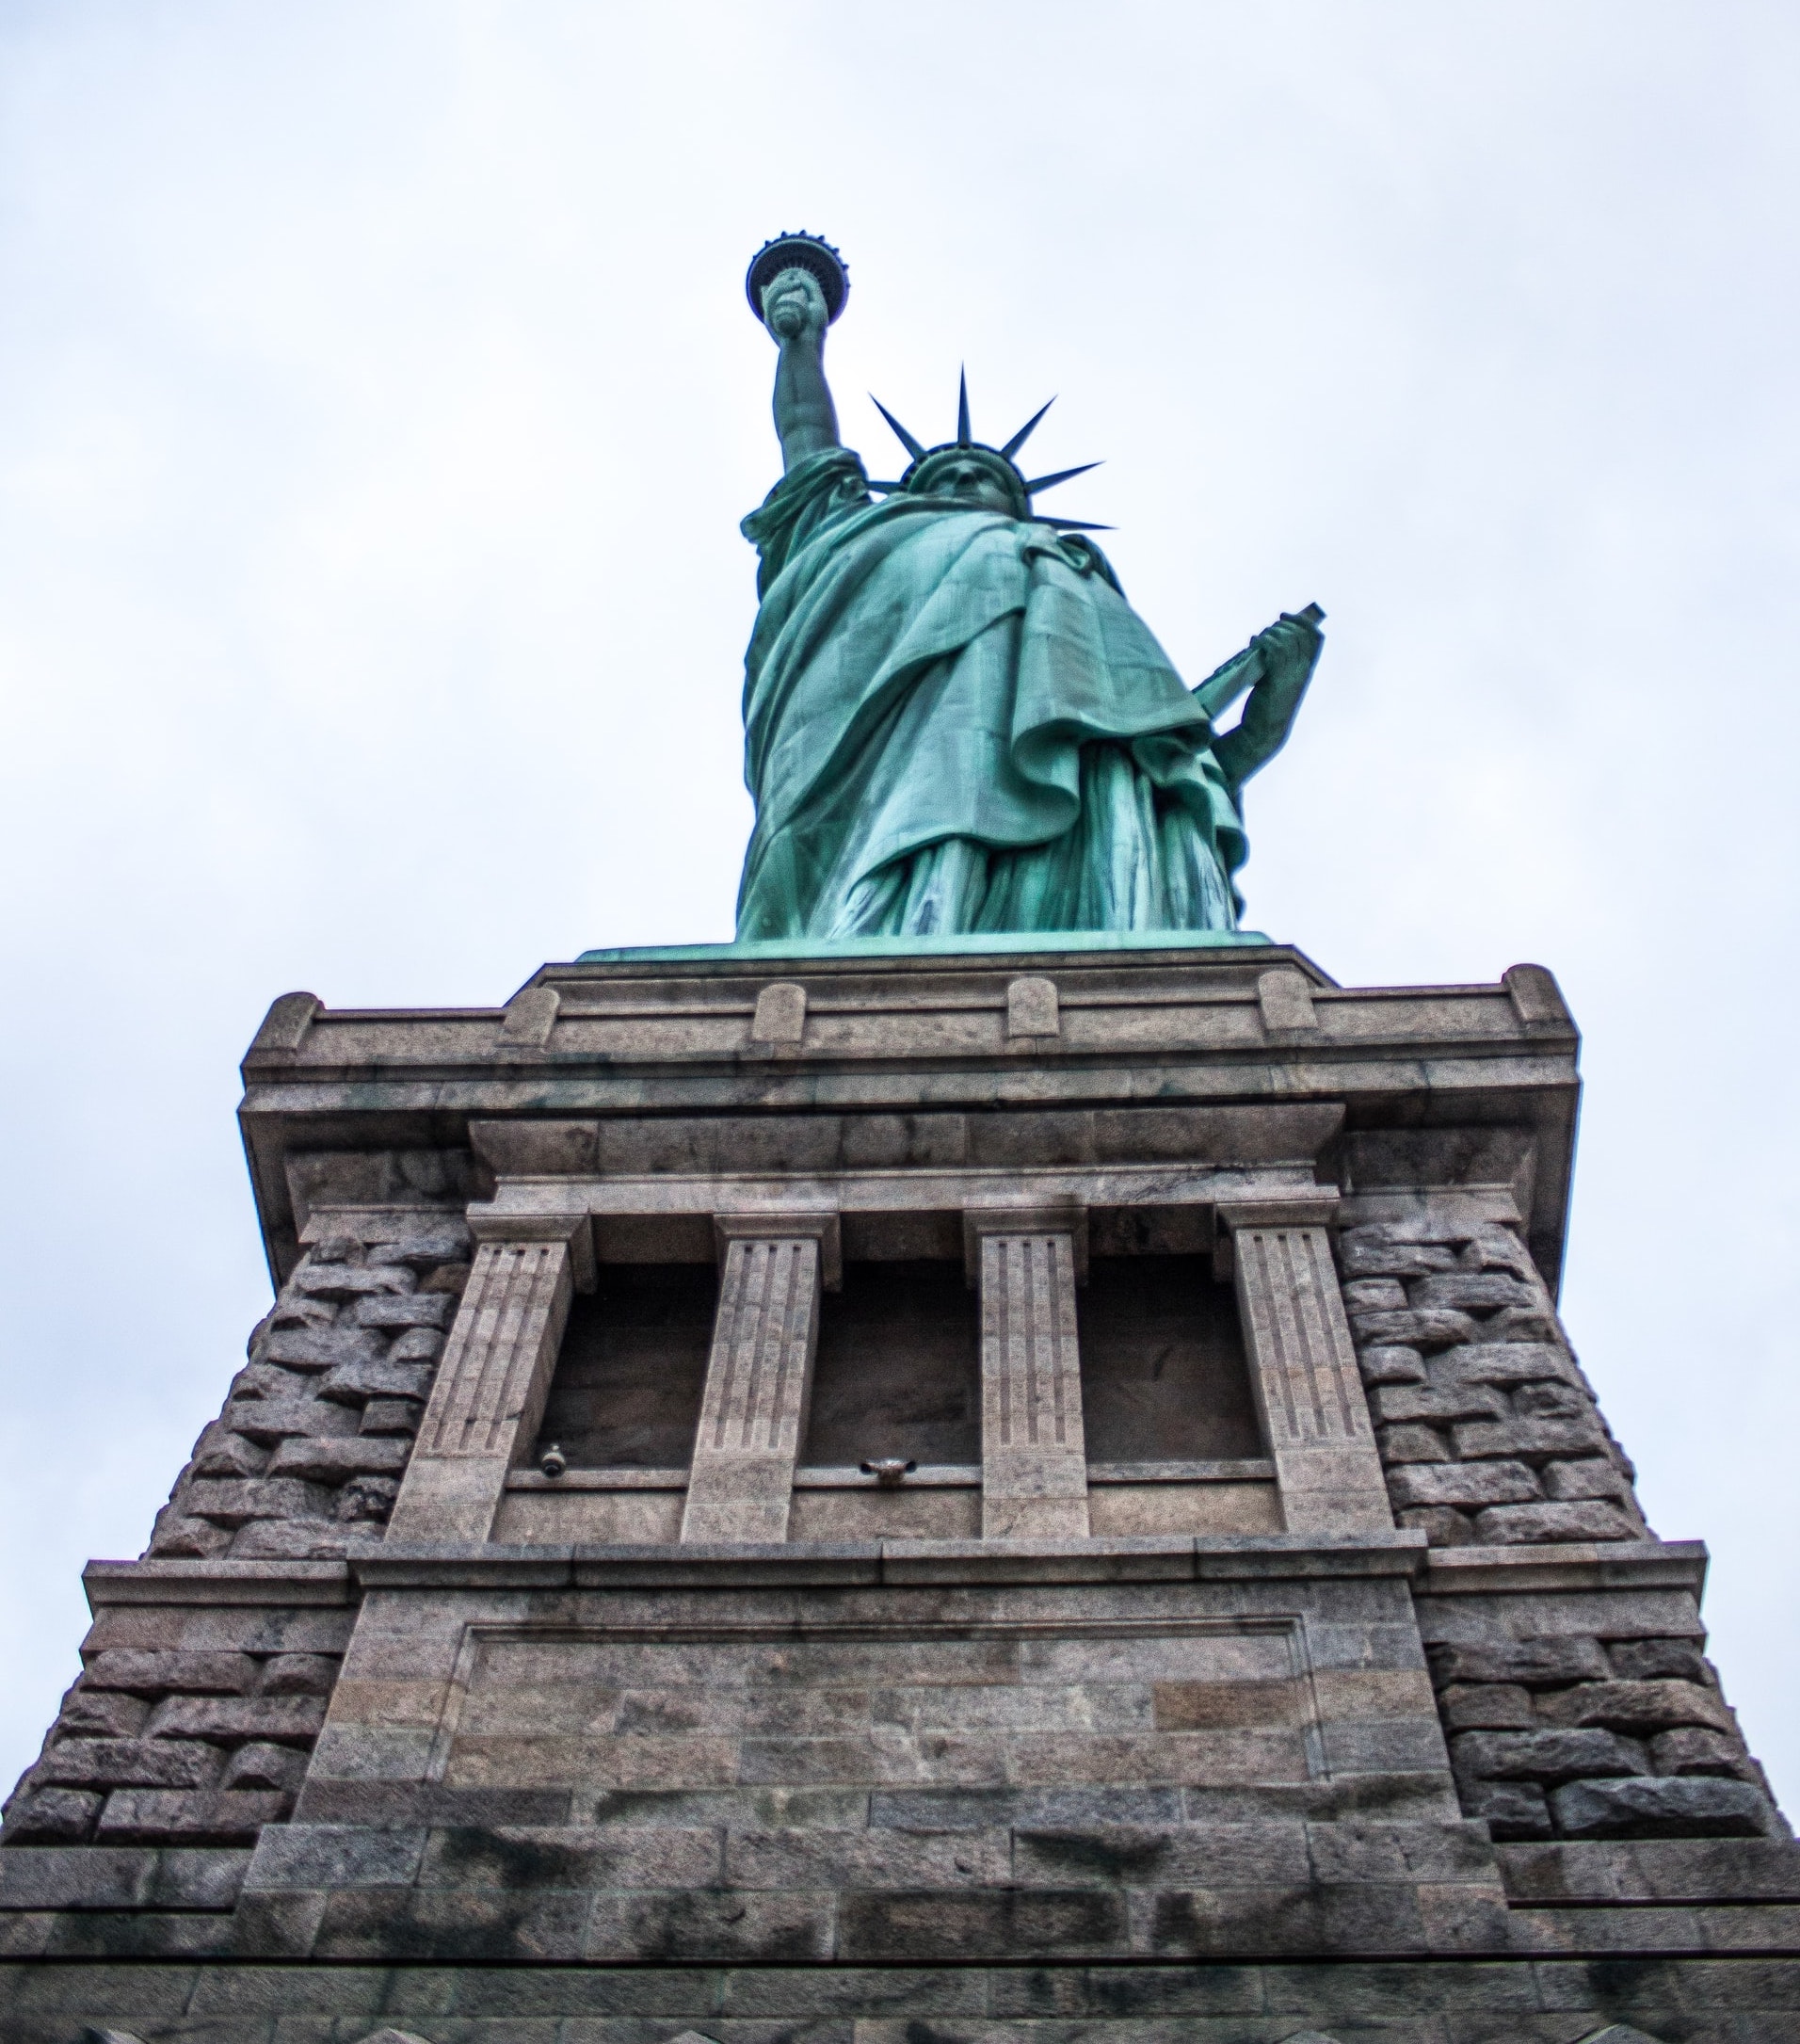 the statue of liberty